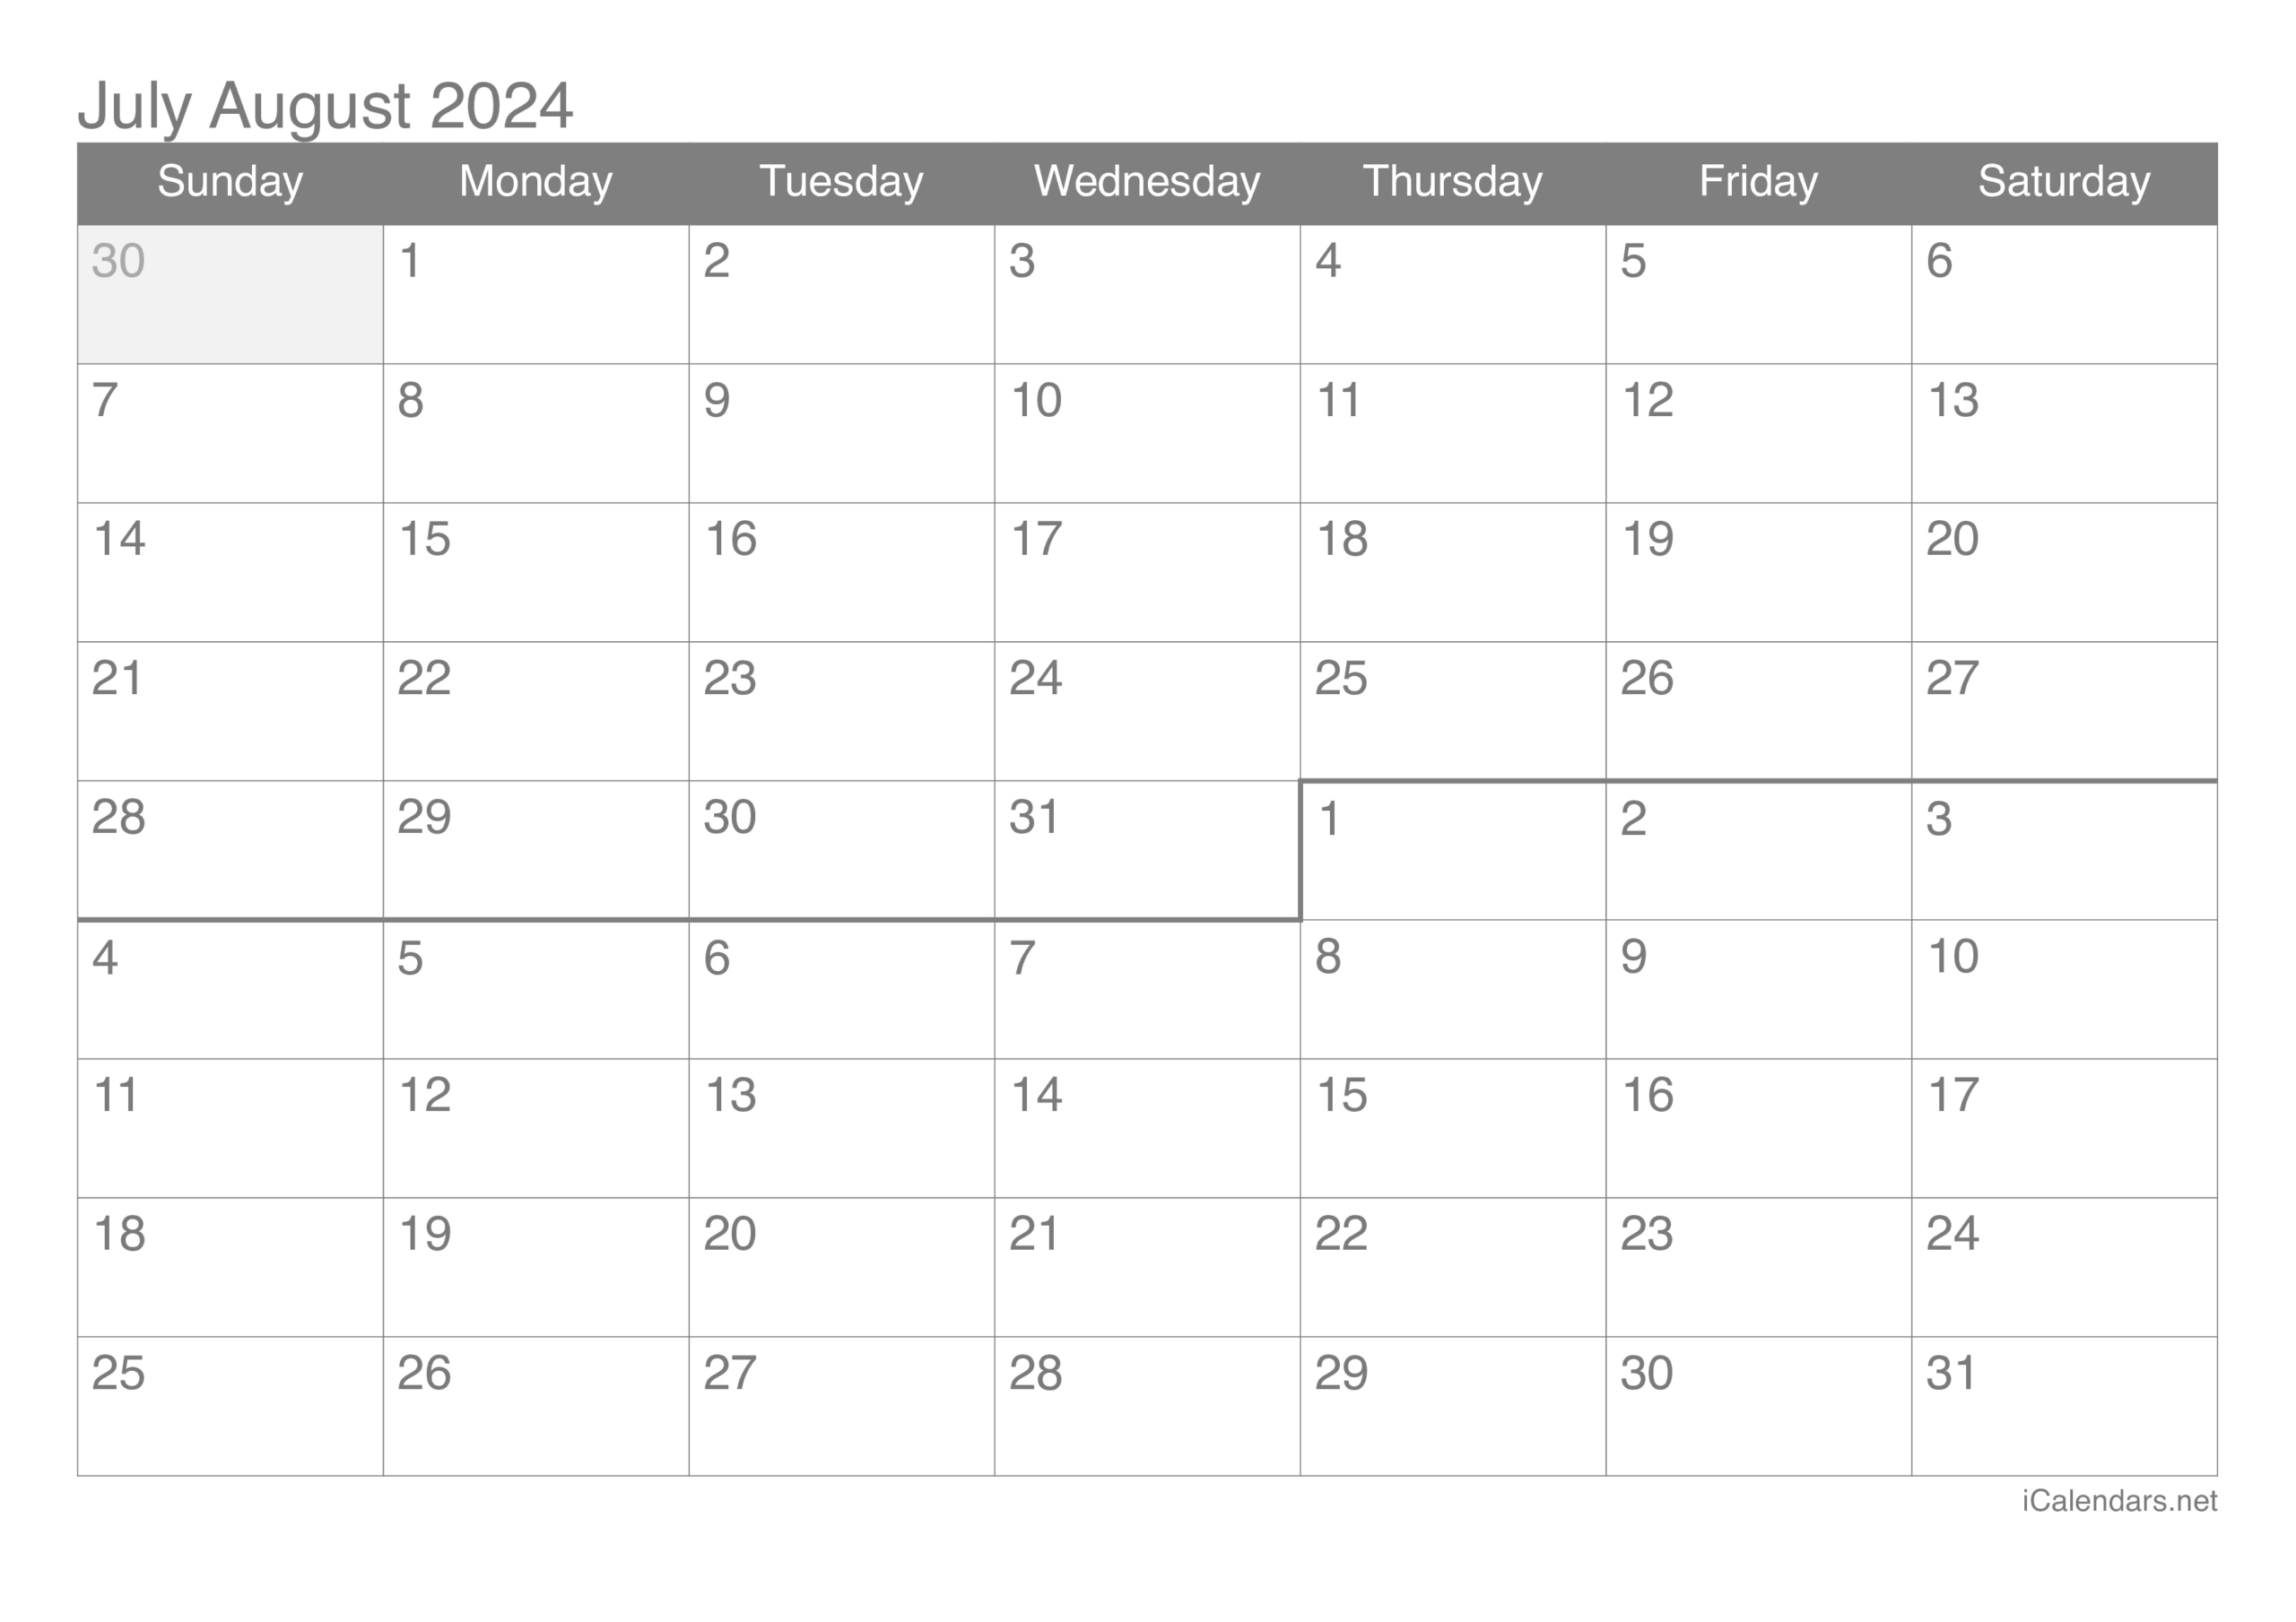 July And August 2024 Printable Calendar intended for July and August 2024 Calendar